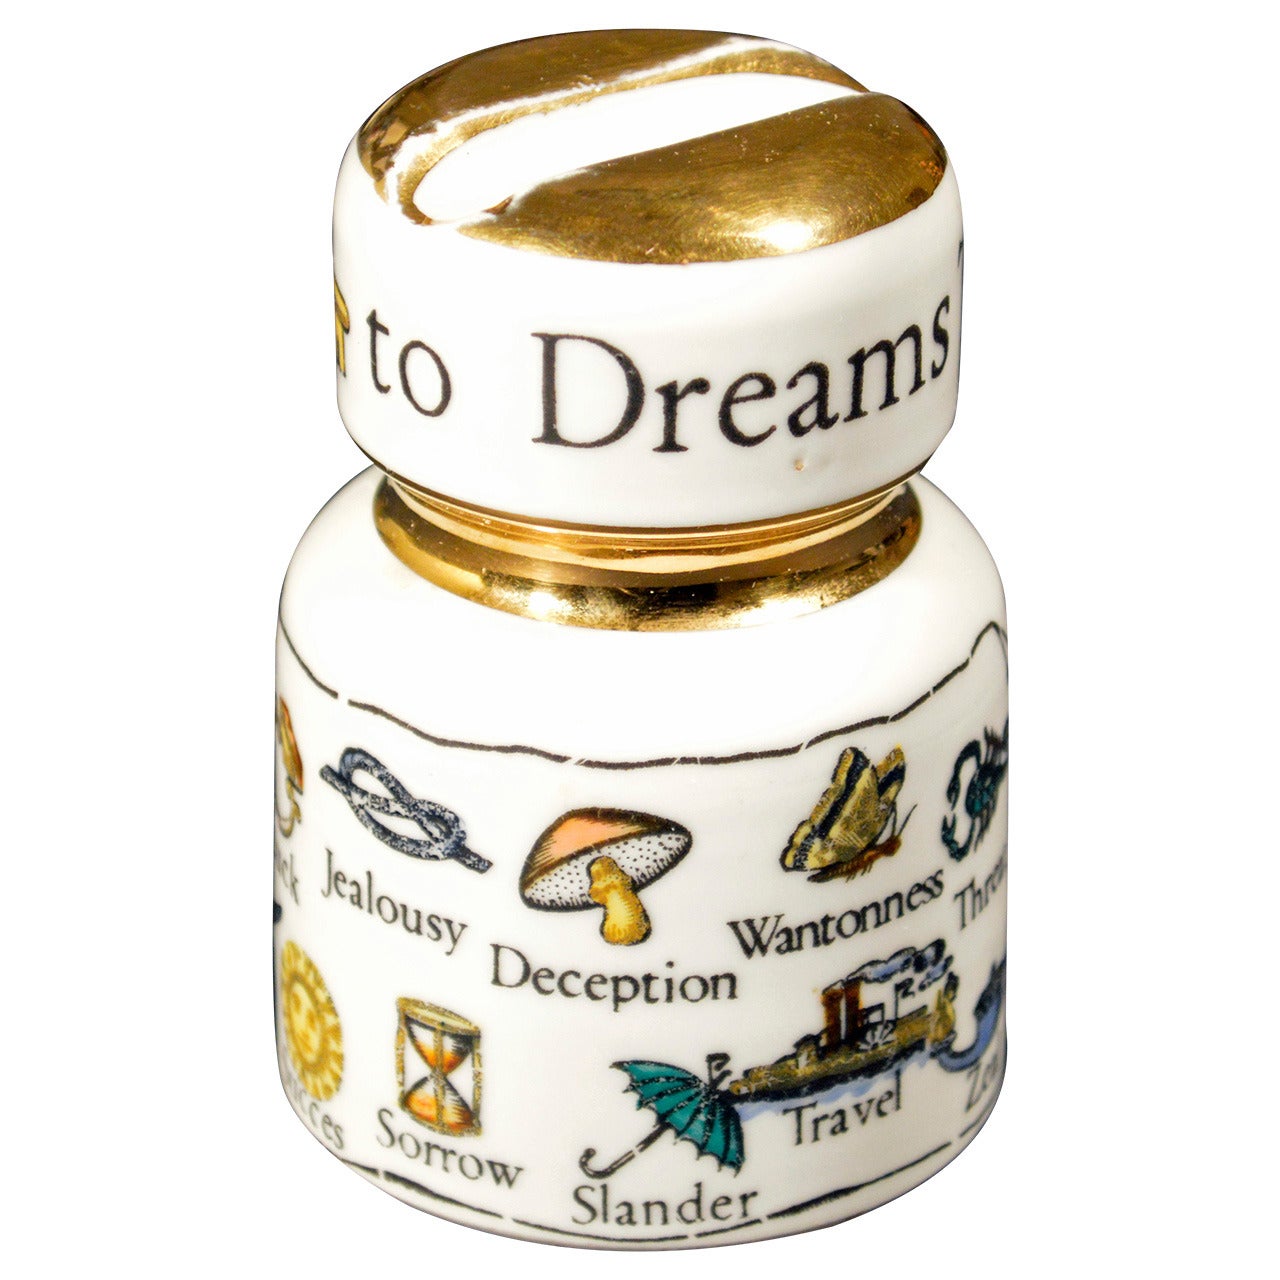 Piero Fornasetti Insulator Paperweight, "The New Key to Dreams"